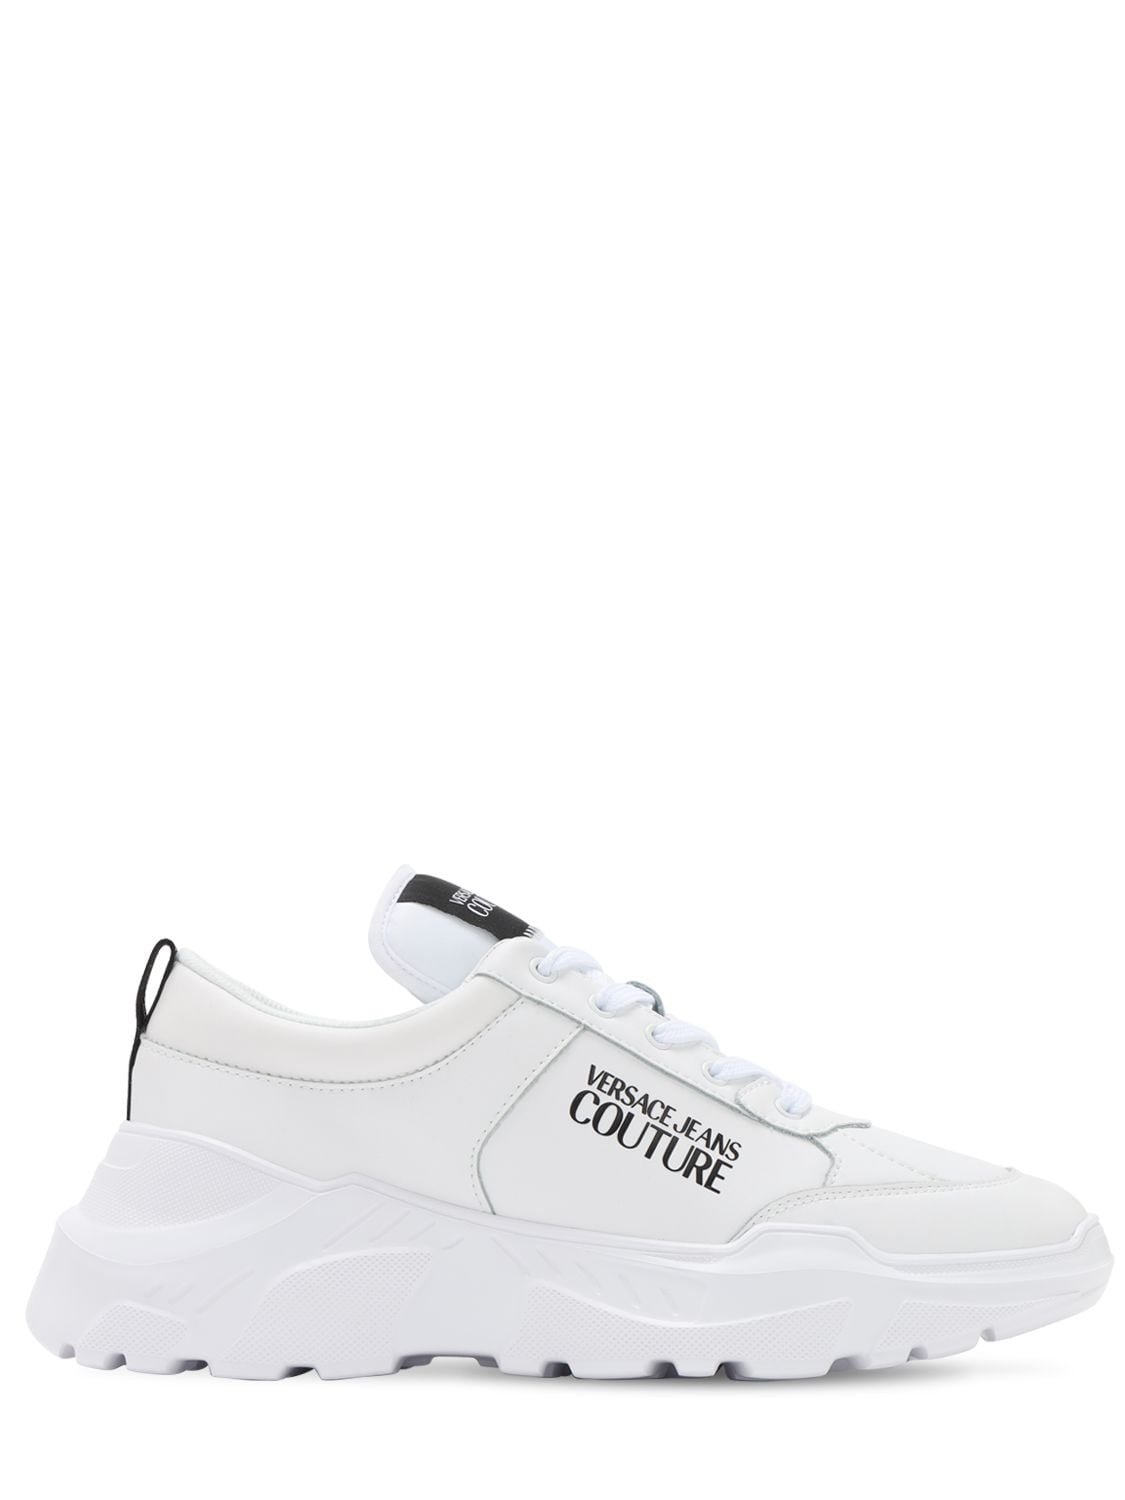 versace jeans sneakers white